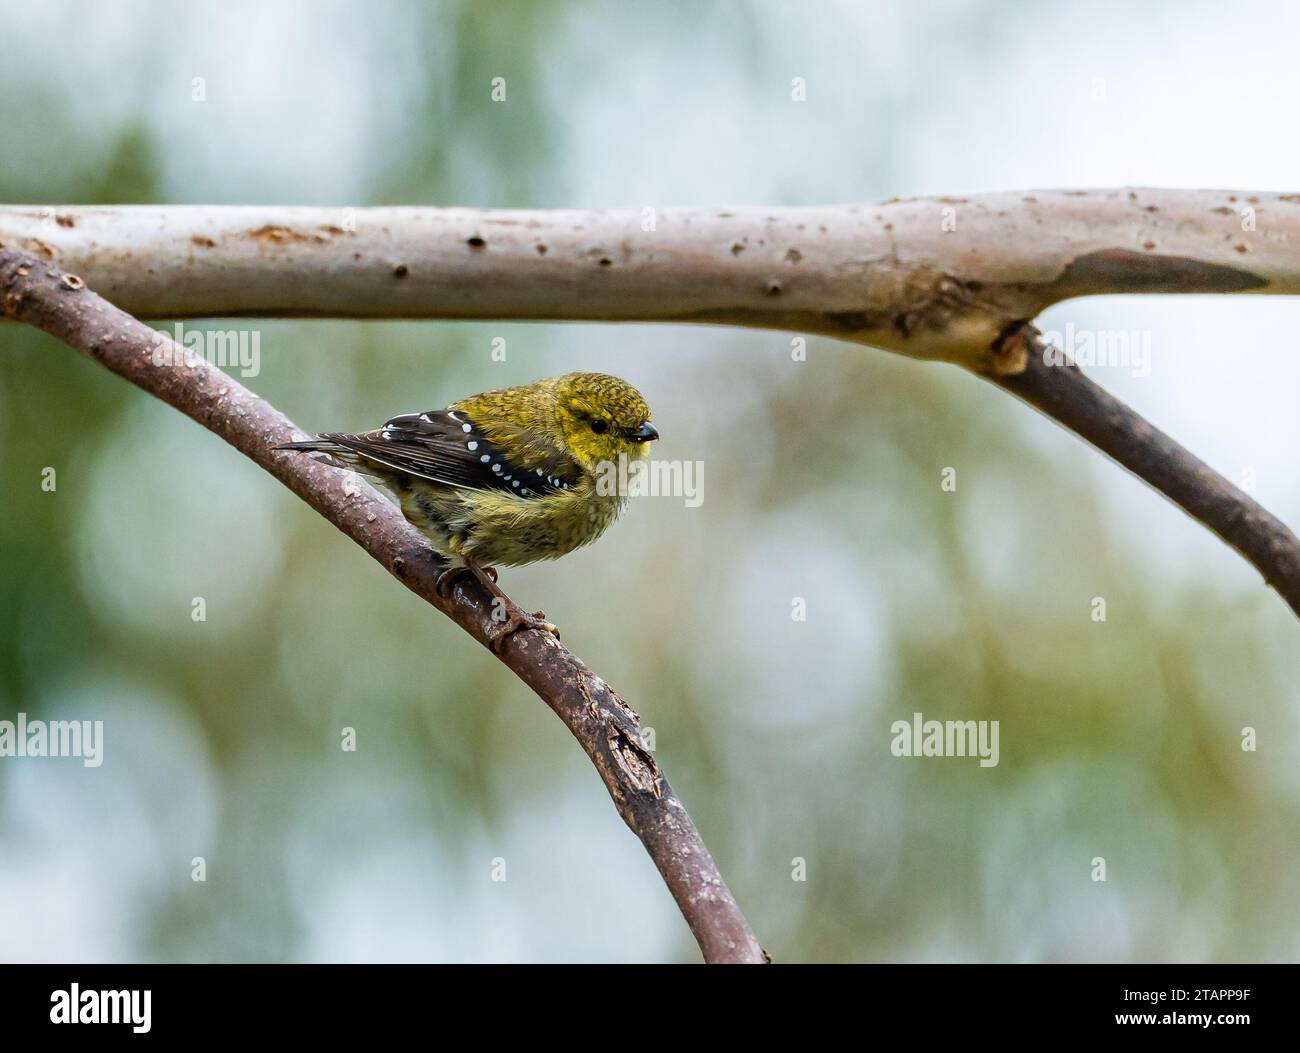 An endangered Forty-spotted Pardalote (Pardalotus quadragintus) perched on a branch. Tasmania, Australia. Stock Photo